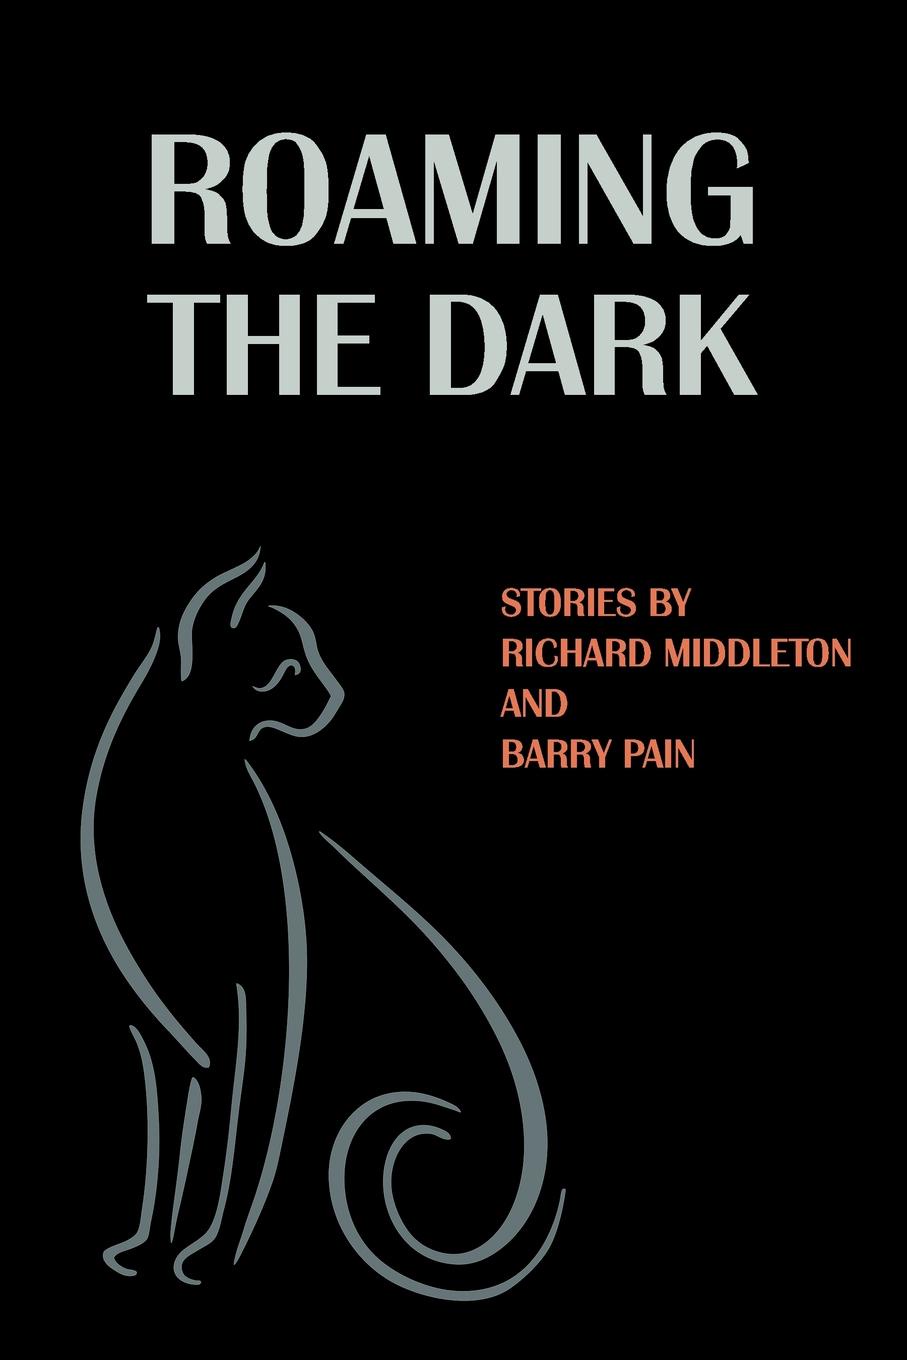 Roaming the Dark. Stories by Richard Middleton and Barry Pain